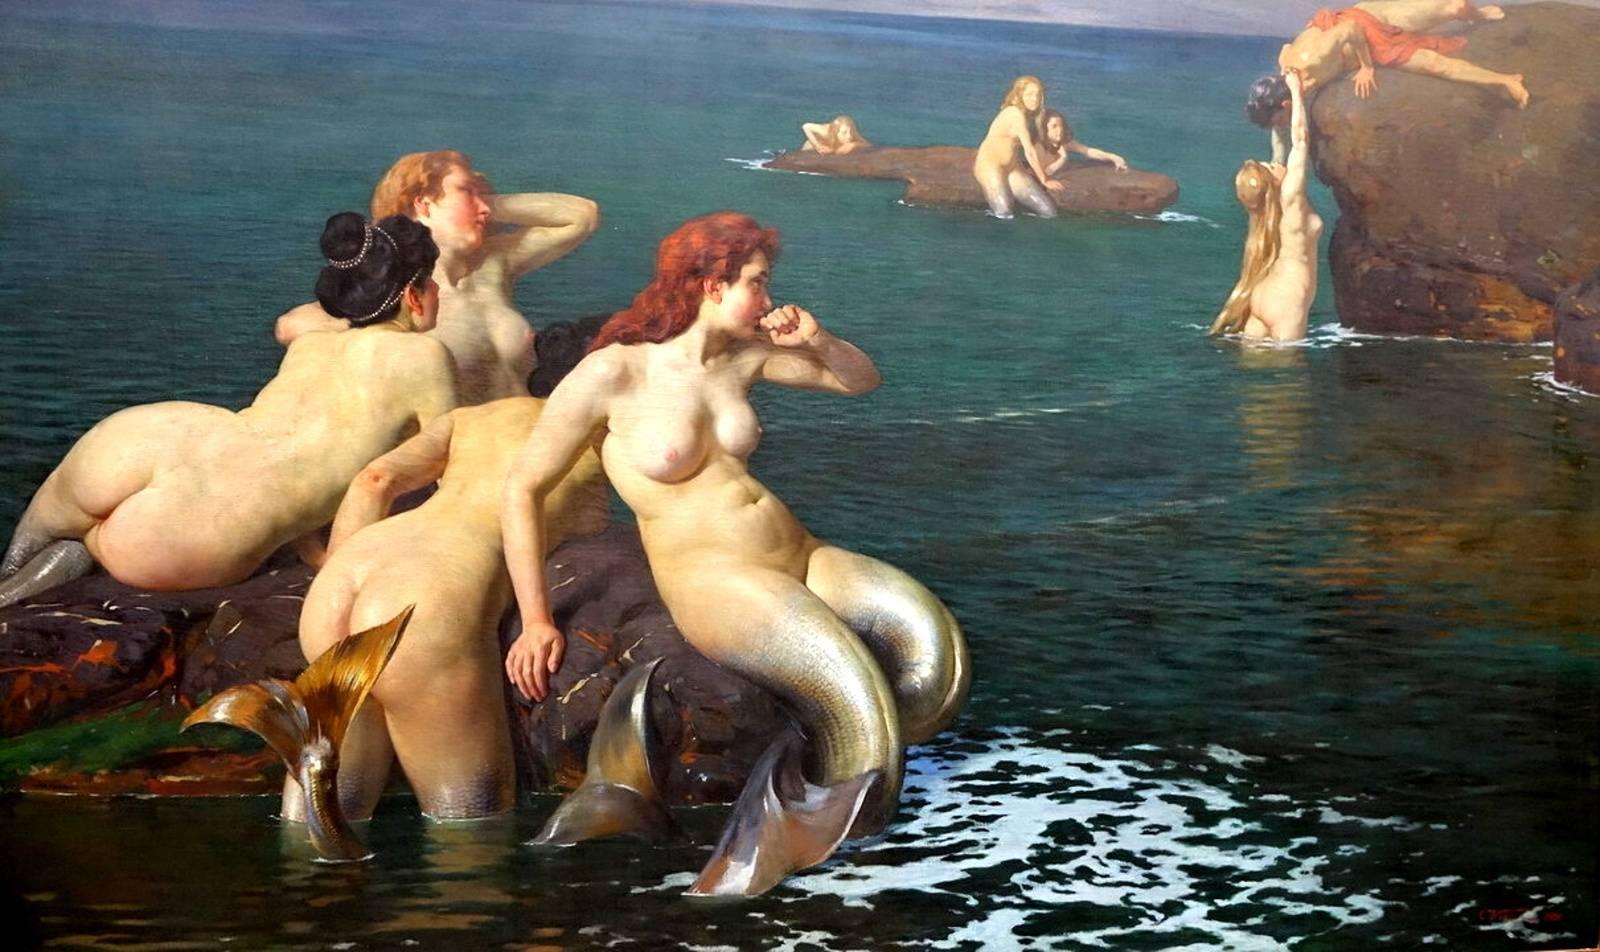 The Mermaids, 1901.
Cesare Viazzi: The most important Symbolist in Italy.
Extraordinary measures: 305 x 230 cm.
Oil on canvas.
Painting published in many art books ...

...about Cesare Viazzi:
Alexandria 1857 - Predosa (AL) 1943. He began his